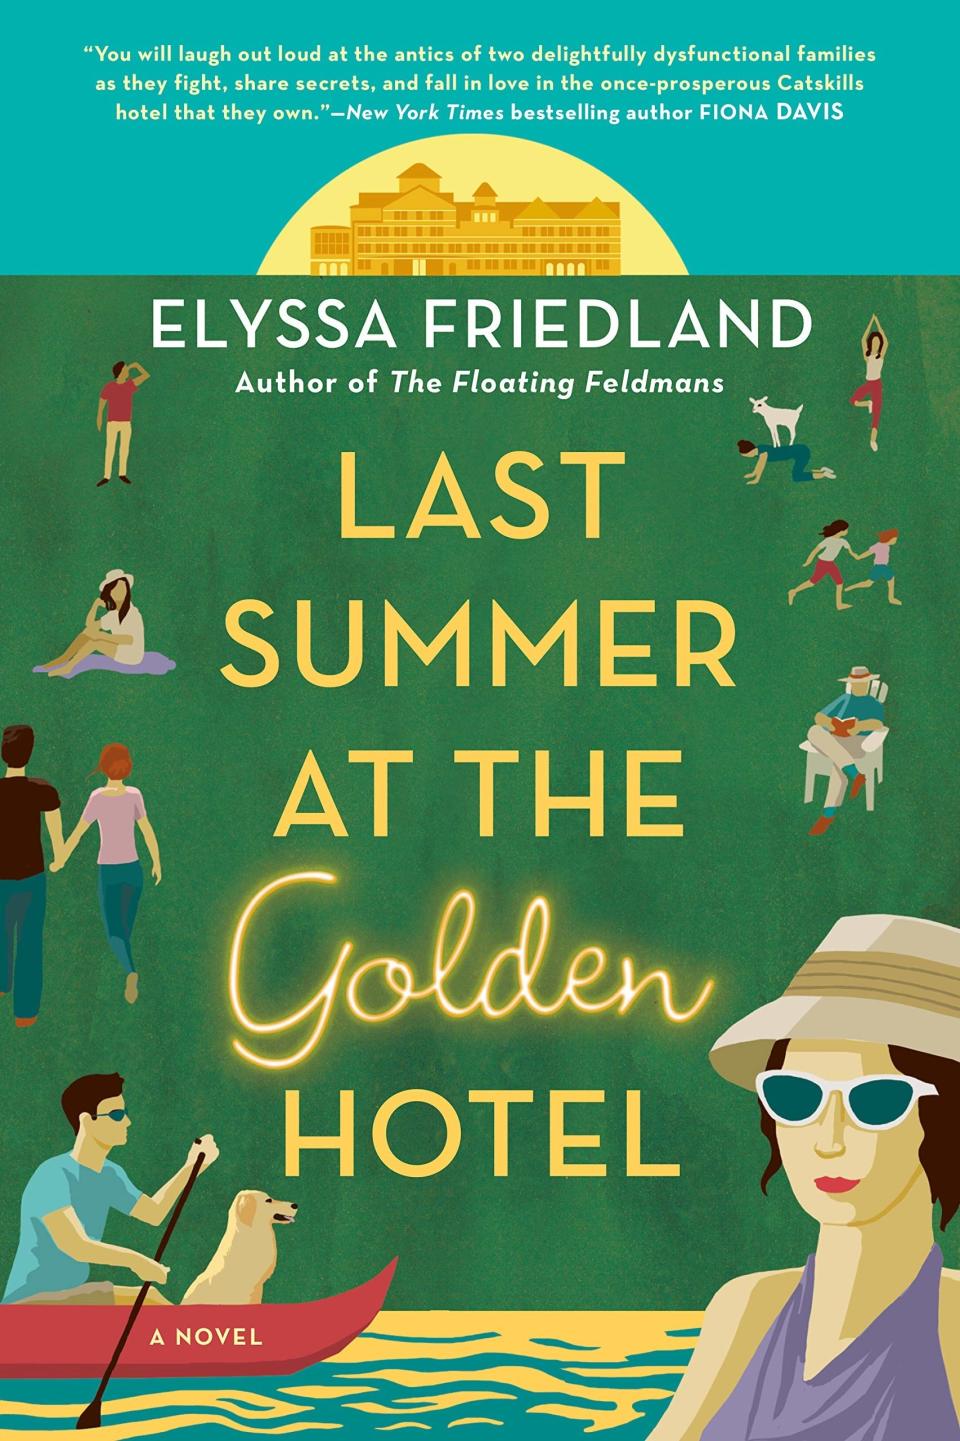 For more than 60 years, the Golden Hotel has been the hot spot for vacationers in the Catskills. But the glamorous resort isn't what it used to be — and neither is the relationship between the two families who own it. With an offer to sell on the table, they have one last summer to try to save the beloved Golden before it's too late. But as old secrets, new drama, and generational gaps emerge, they'll have a harder time than they thought bringing the magic back. —Kirby Beaton